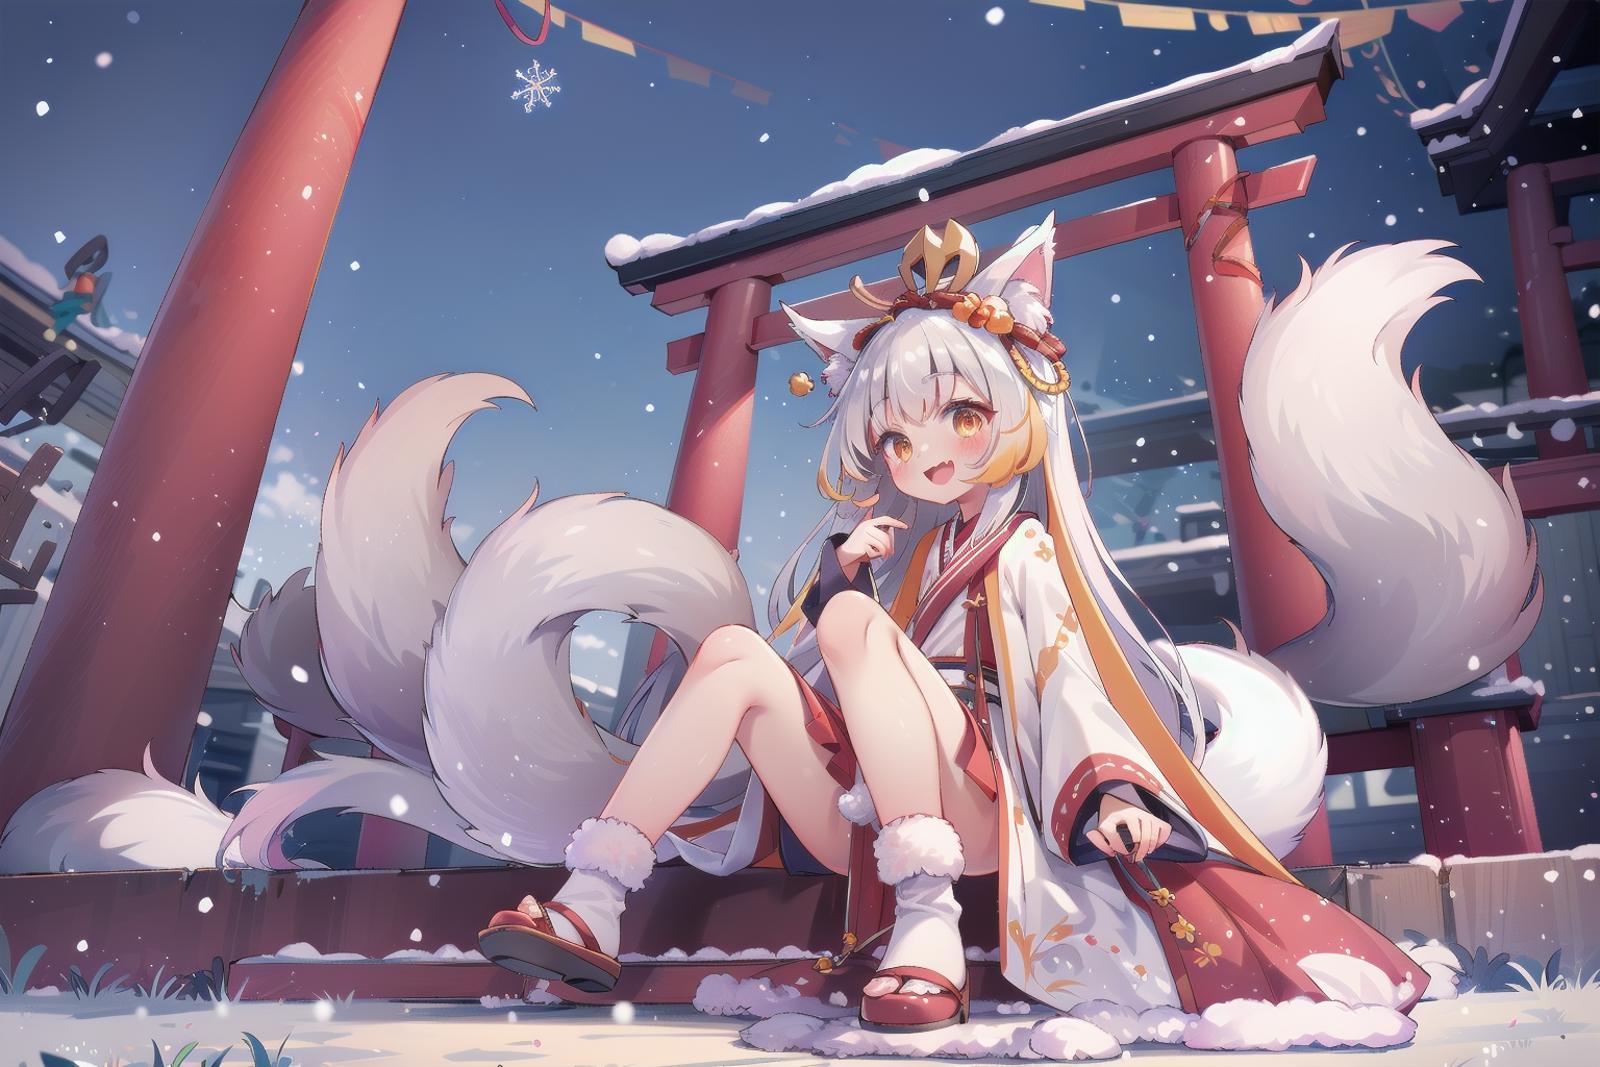 A young girl with a fox tail and ears is sitting on a bench in the snow.